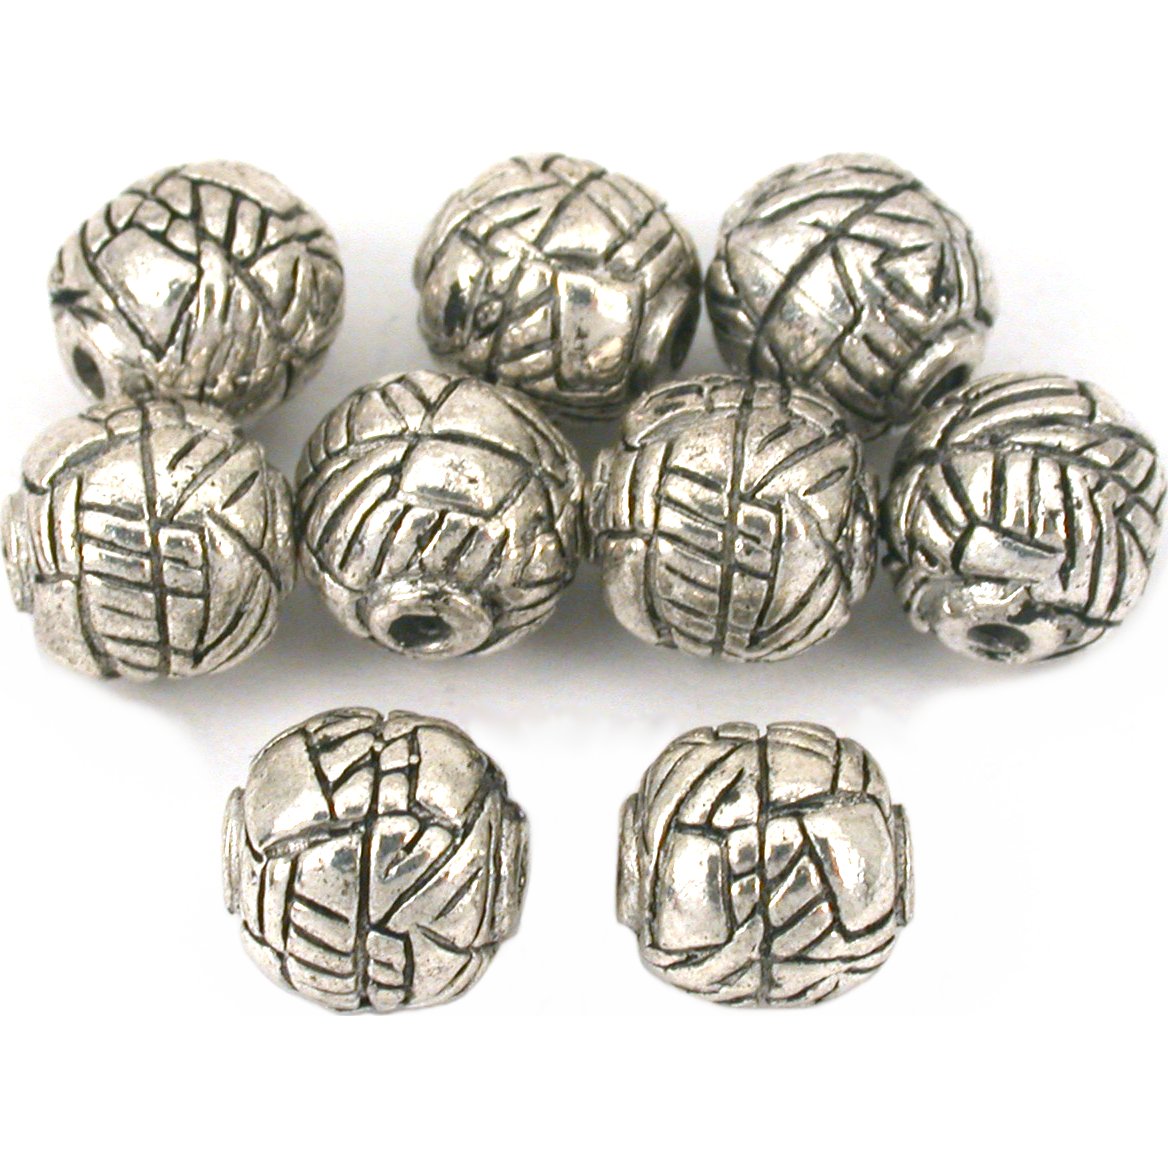 Bali Round Beads Antique Silver Plated 8mm 8Pcs Approx.